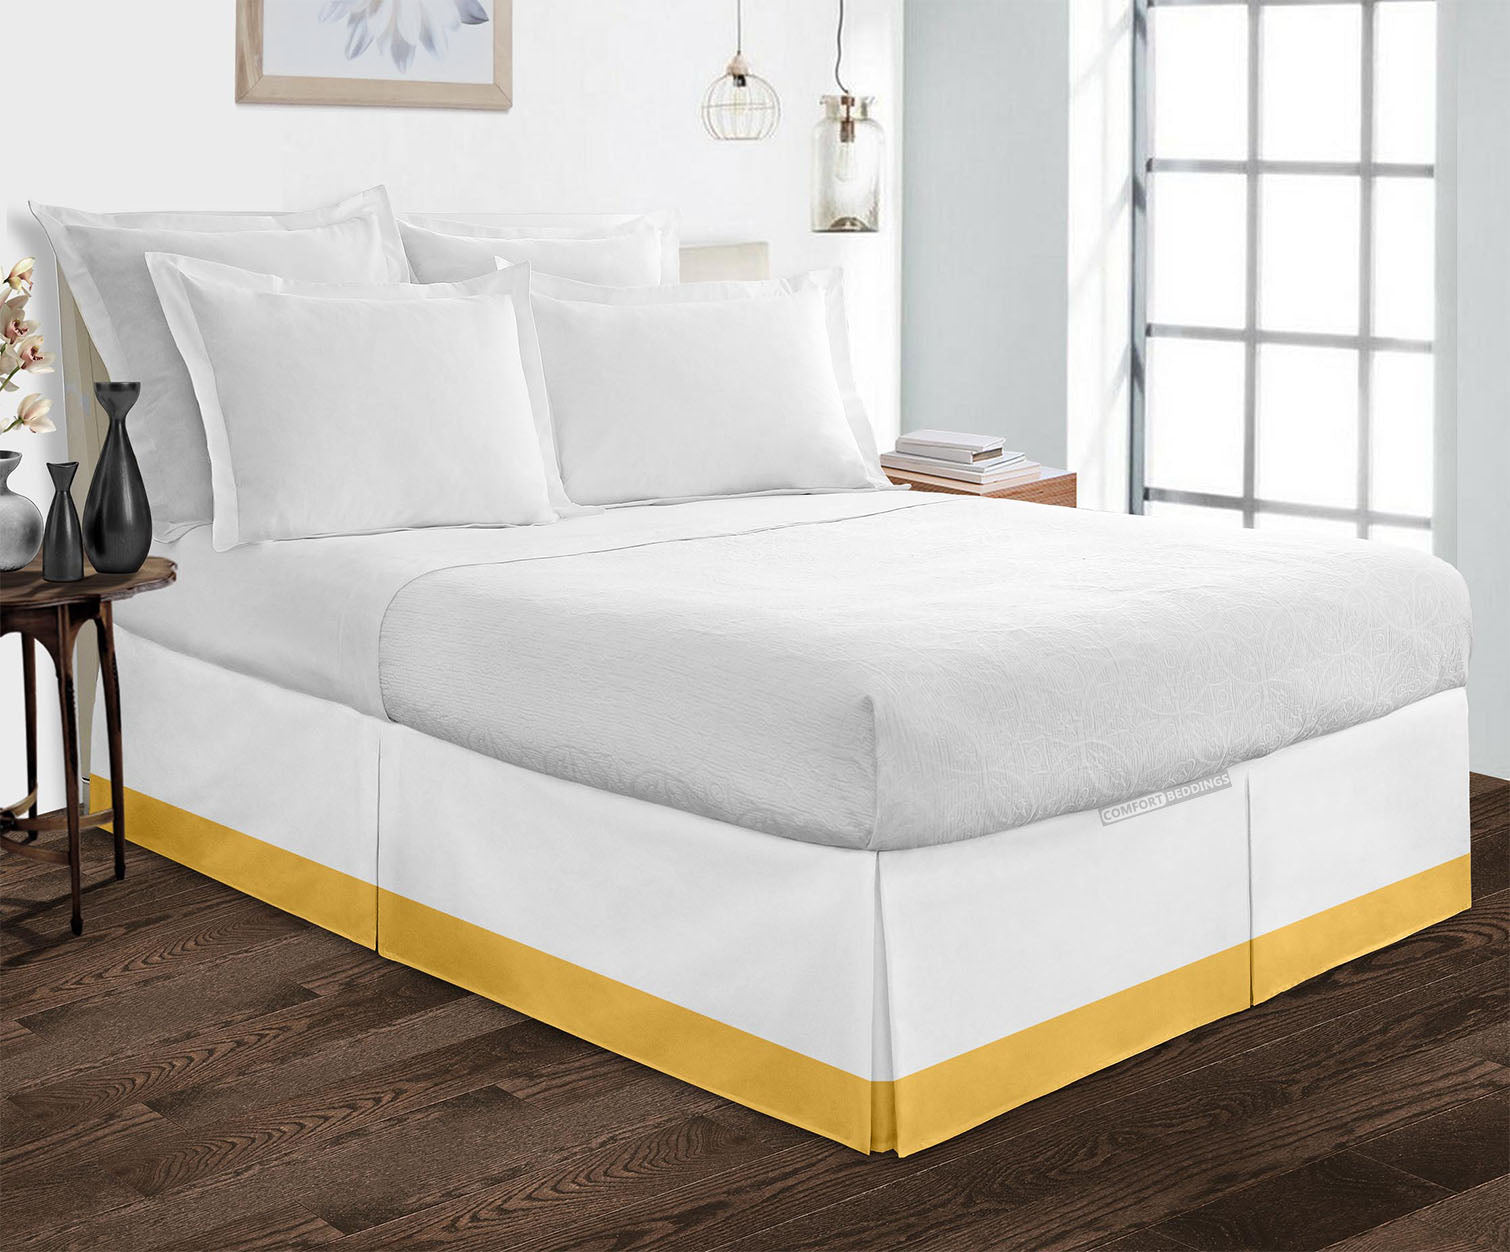 Egyptian cotton Golden two tone bed skirt